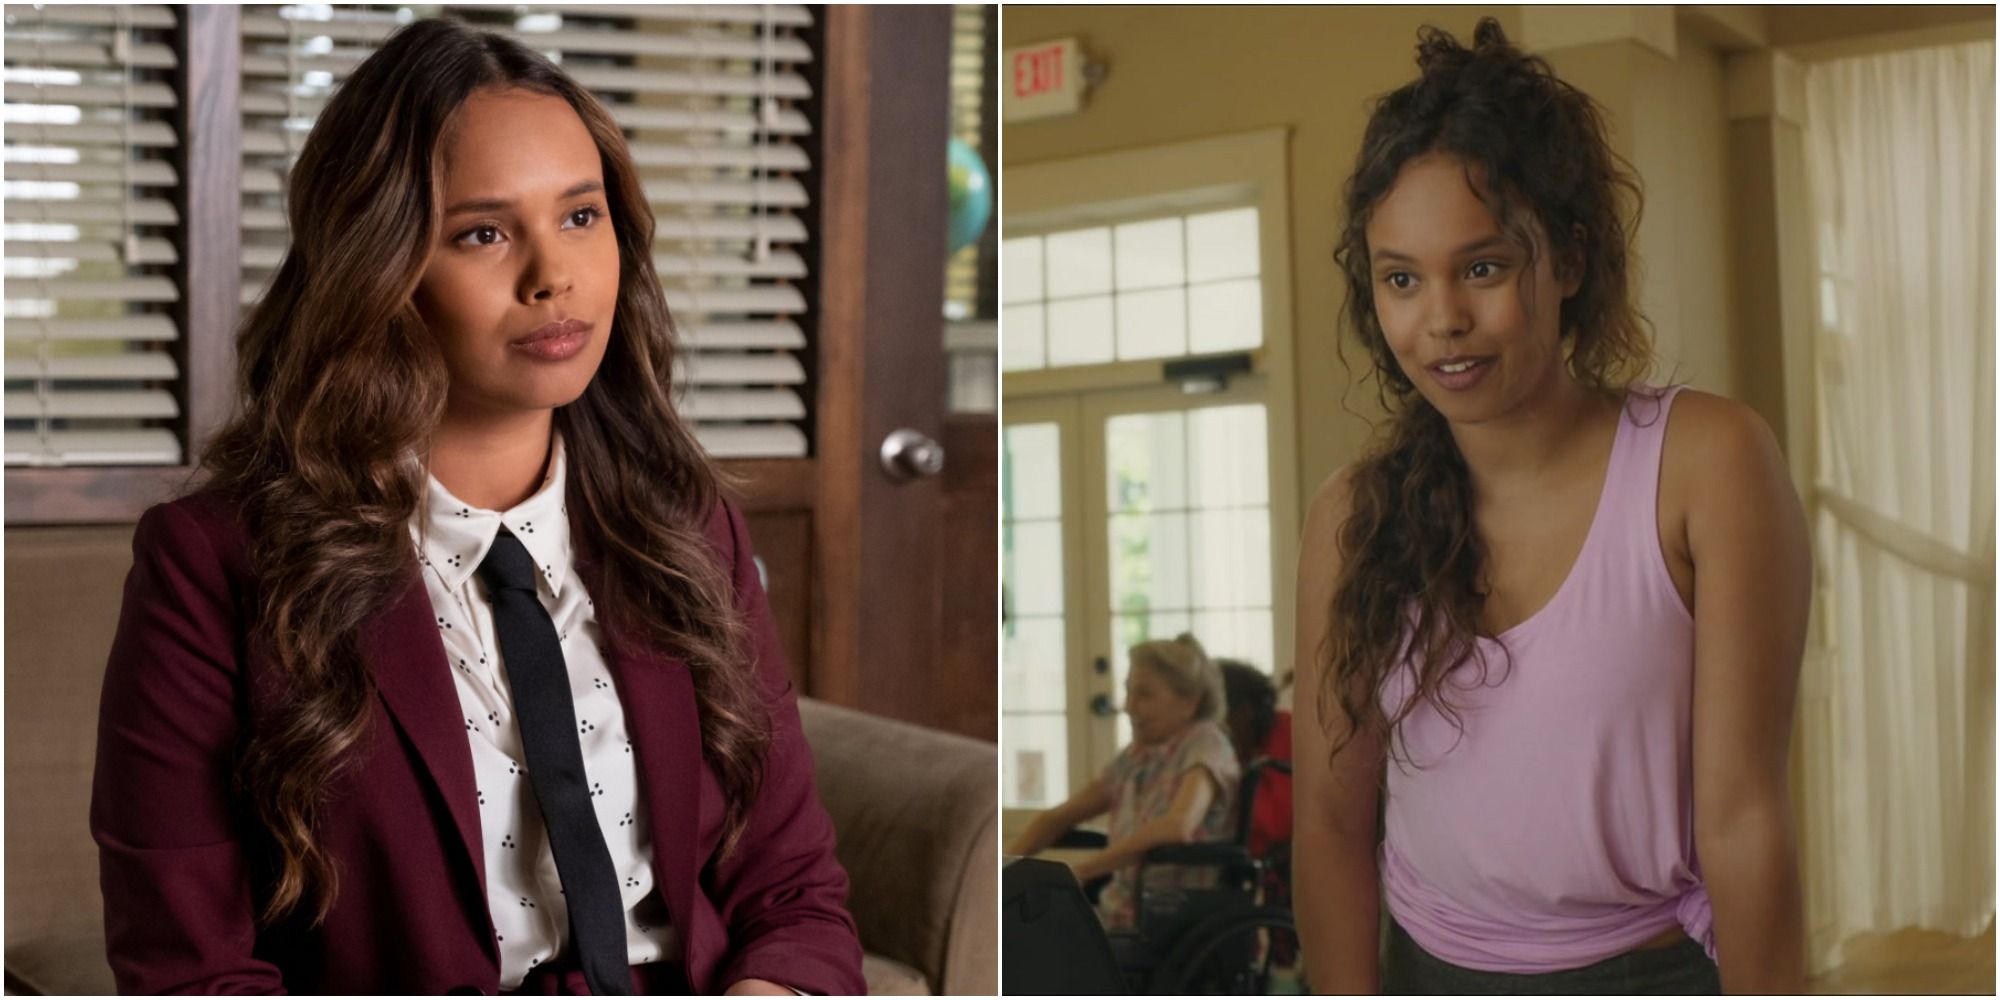 Alisha-Boe-In-13-Reasons-Why-and-Poms